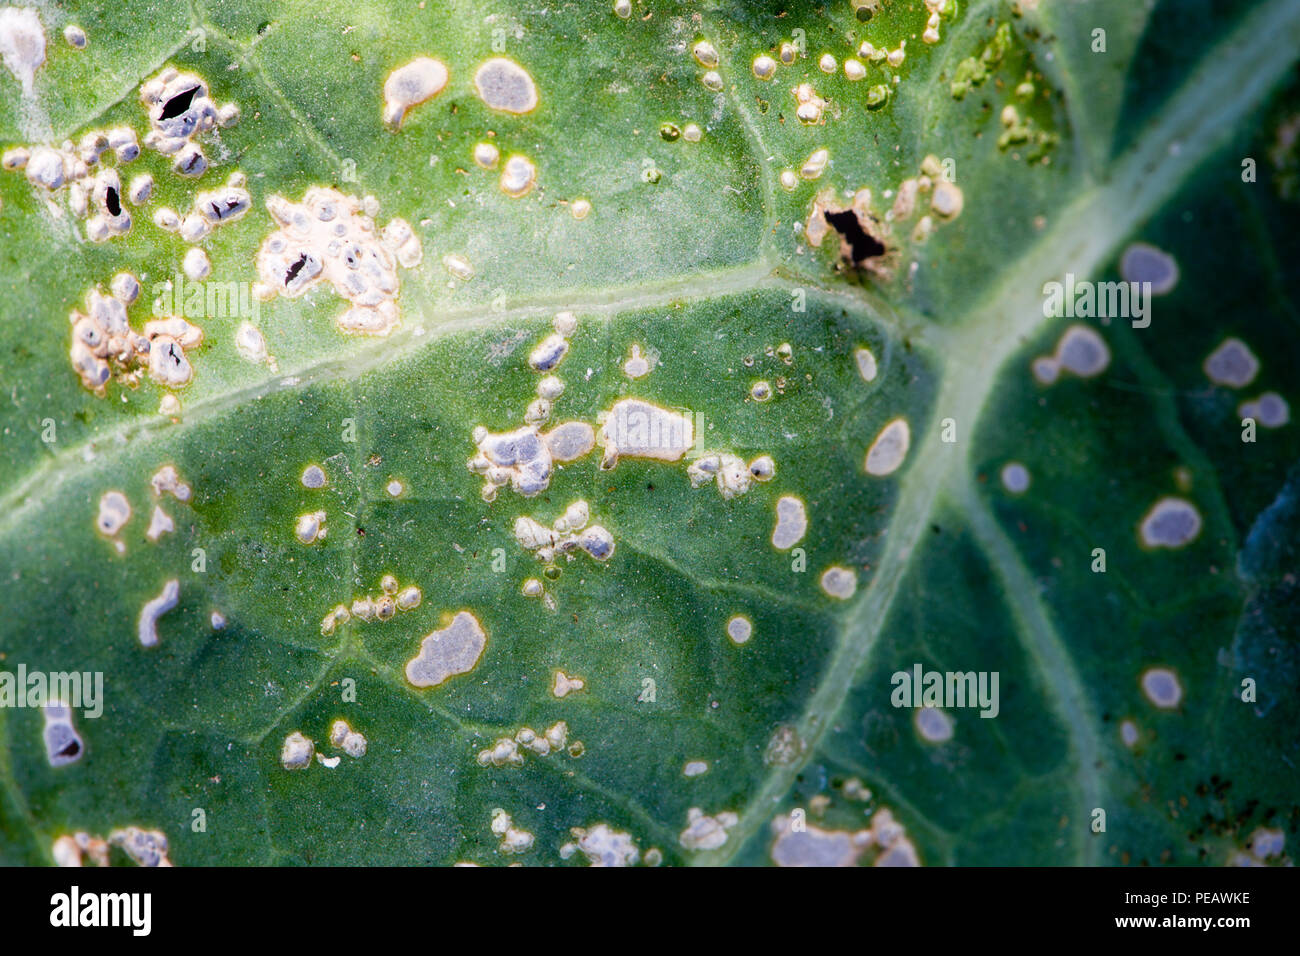 Damage to a brassica leaf (Brassica oleracea)) caused by cabbage white caterpillars and flea beetle Stock Photo